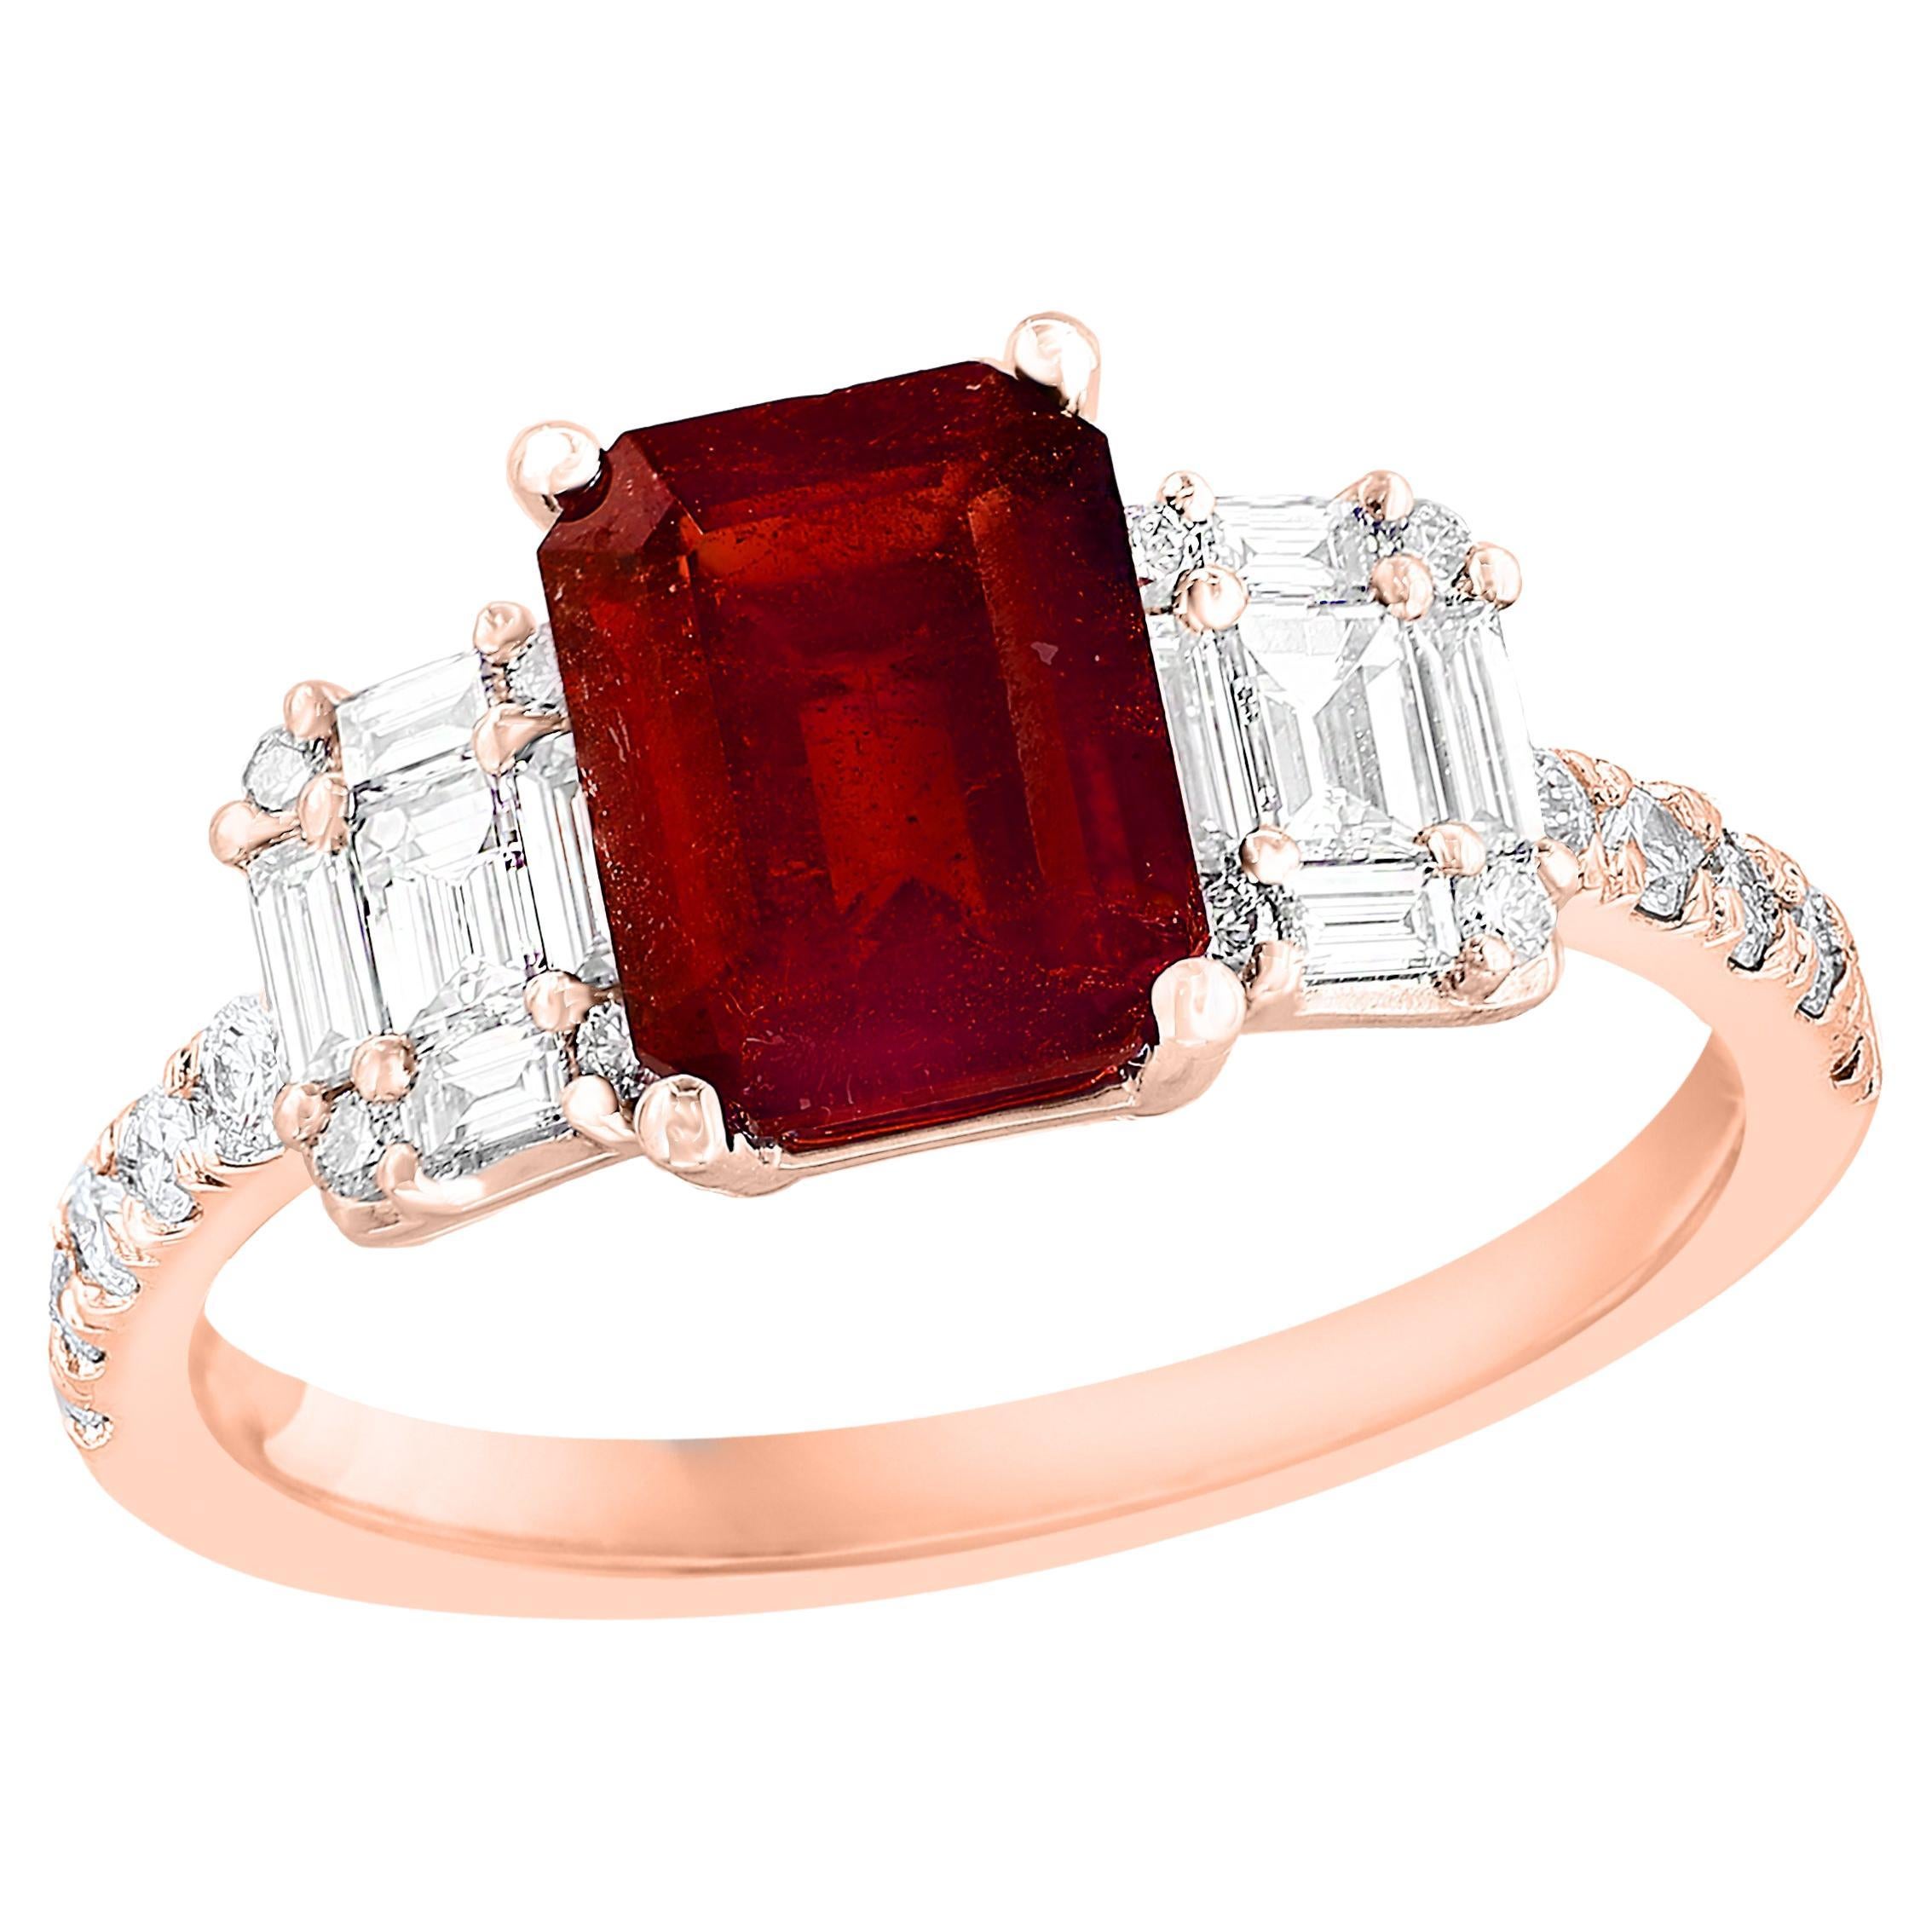 1.87 Carat Emerald Cut Ruby and Diamond Ring in 18k Rose Gold